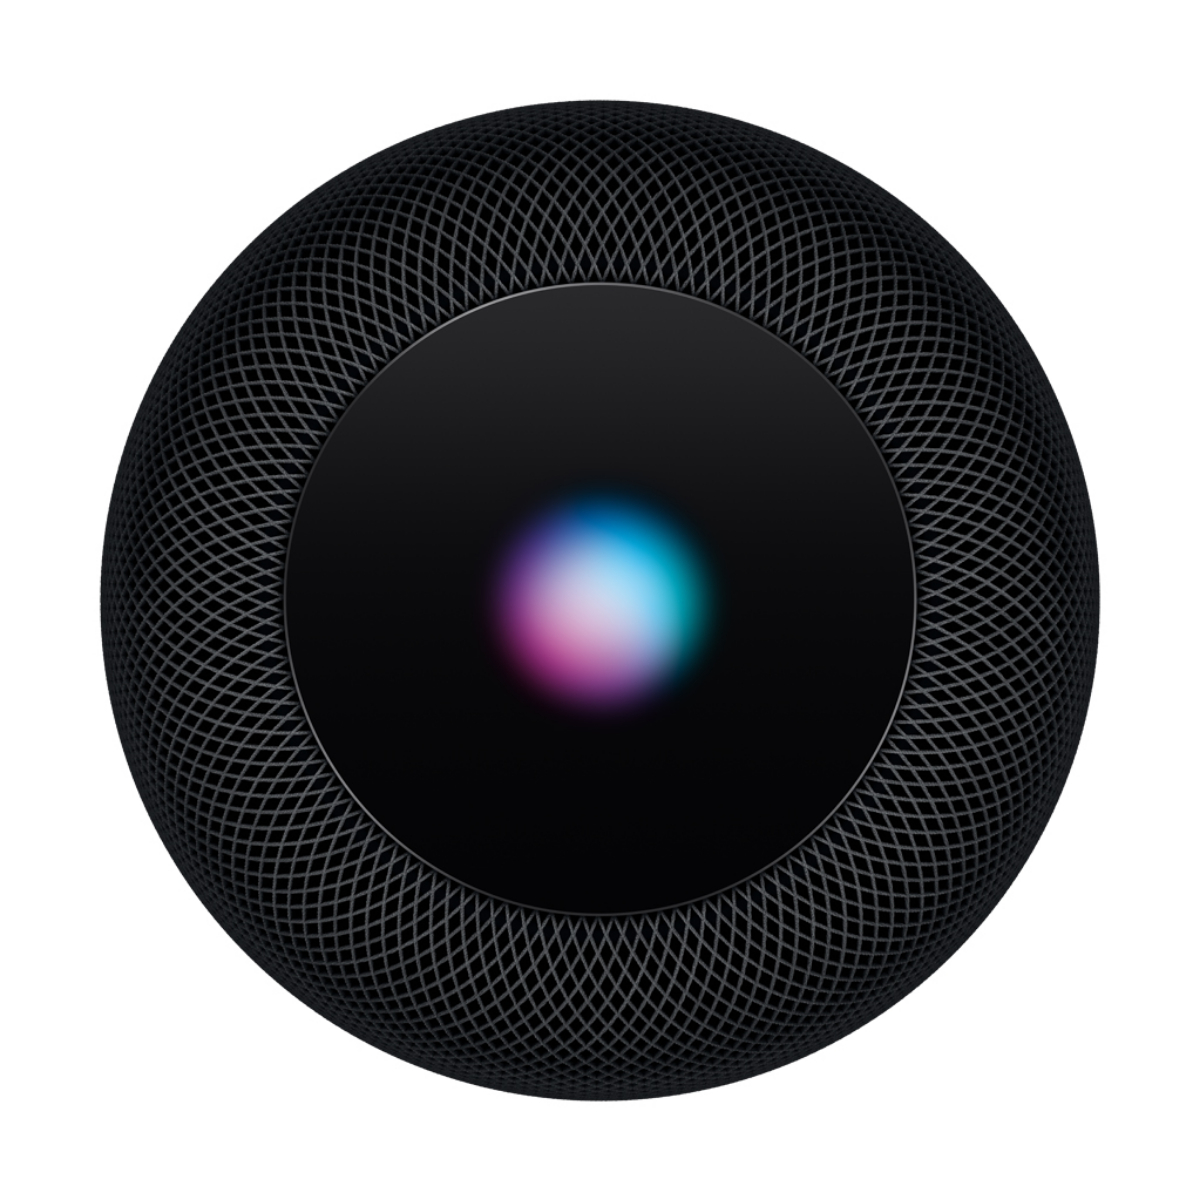 Apple HomePod - Space Gray - image 2 of 3